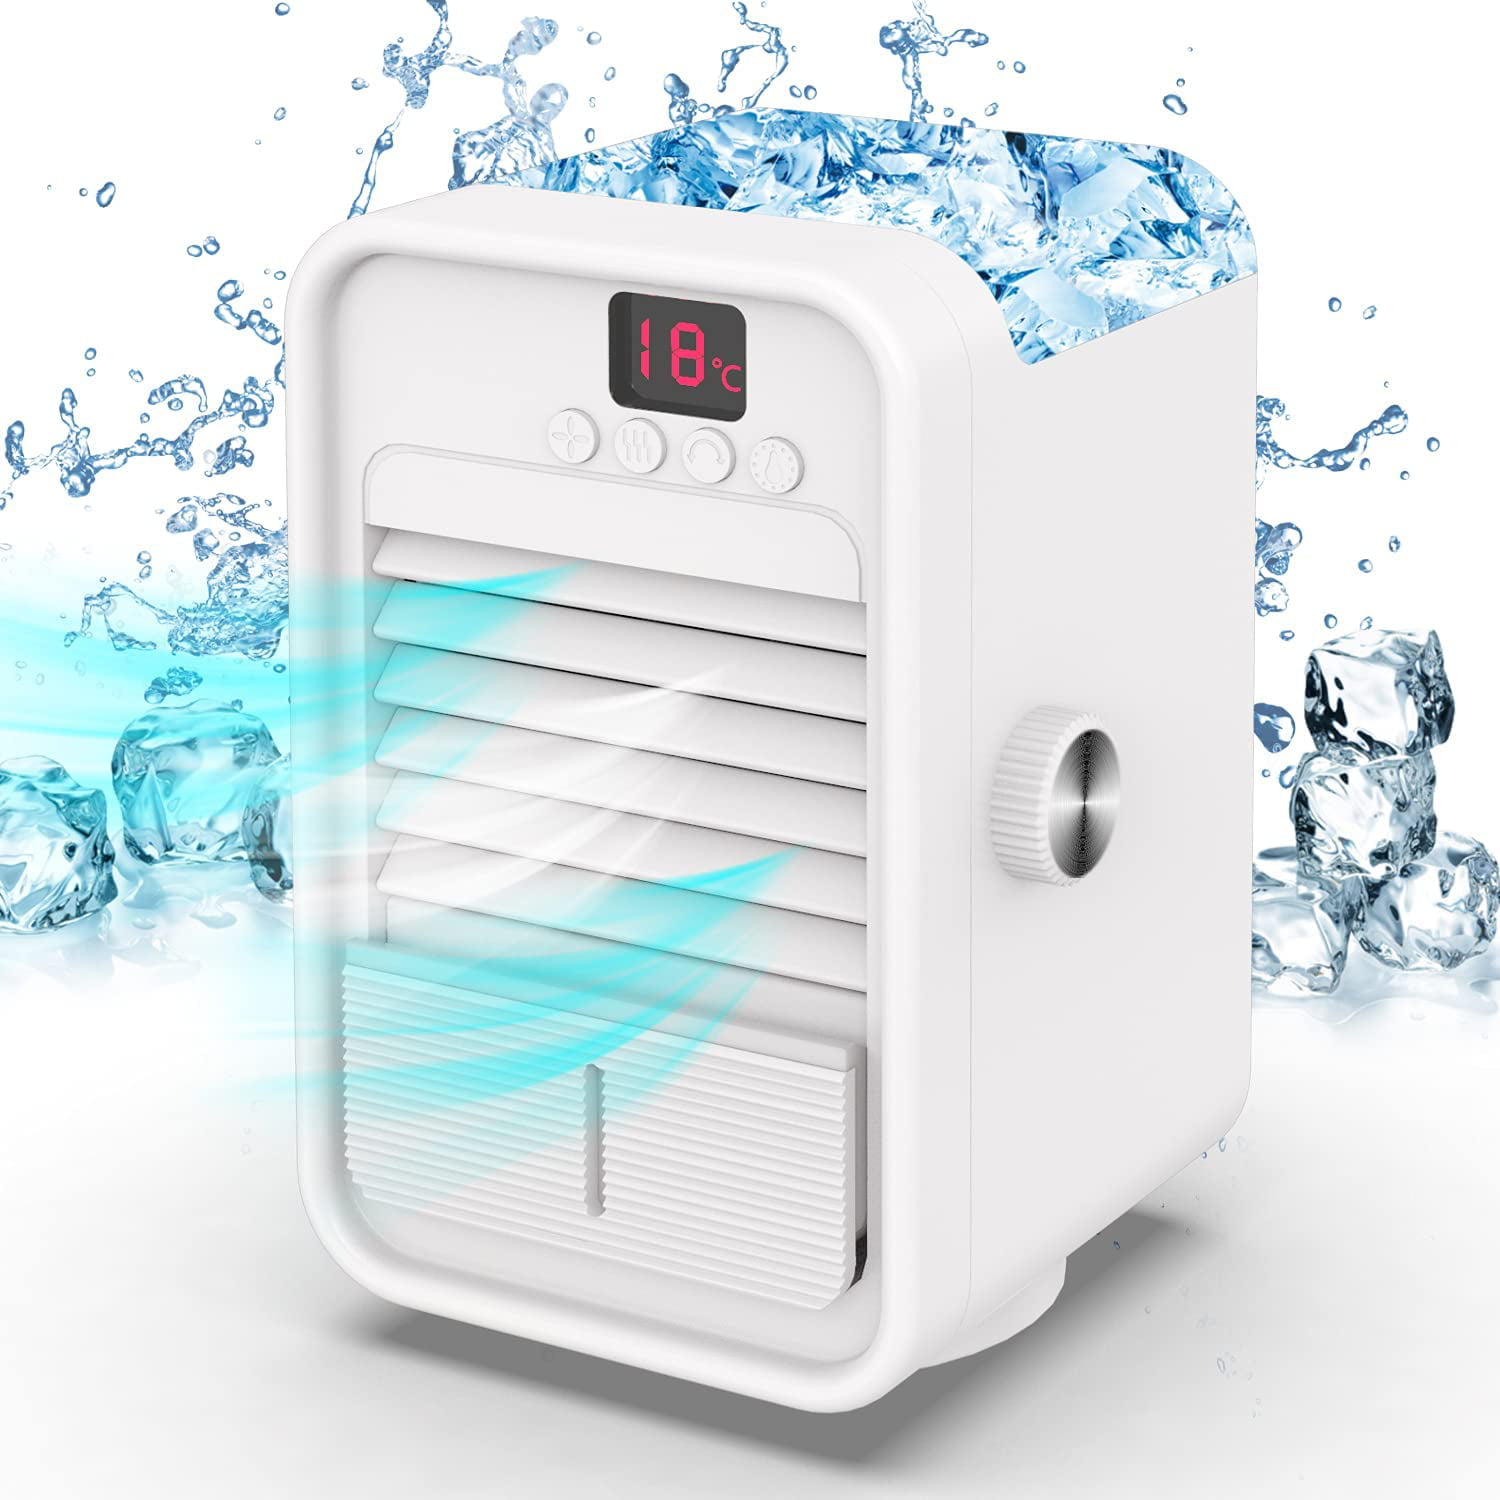 Portable Air Conditioner Evaporative Air Cooler Rechargeable Battery Operated Air Conditioner with 3 Speed Modes Personal Mini Air Conditioner Fan 